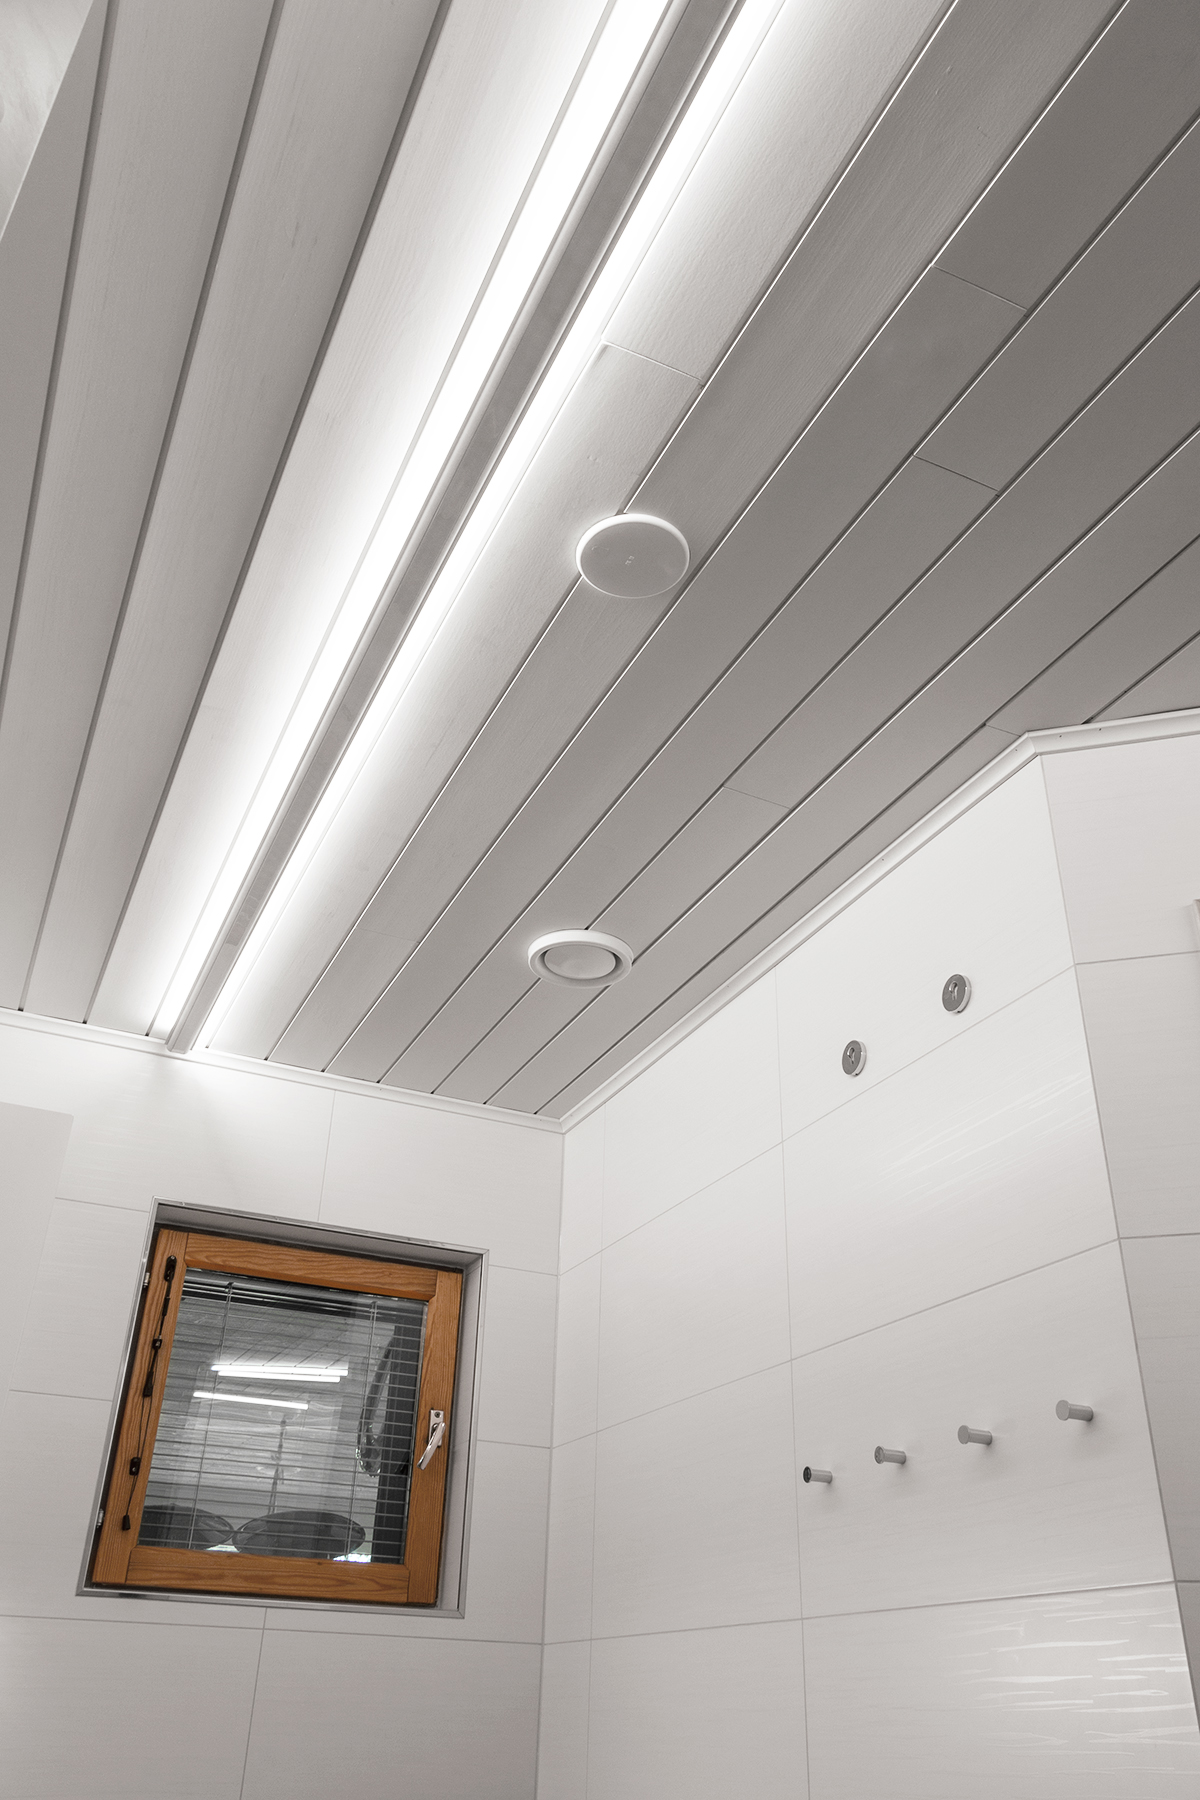 led profiles in the ceiling giving indirect light to the bathroom